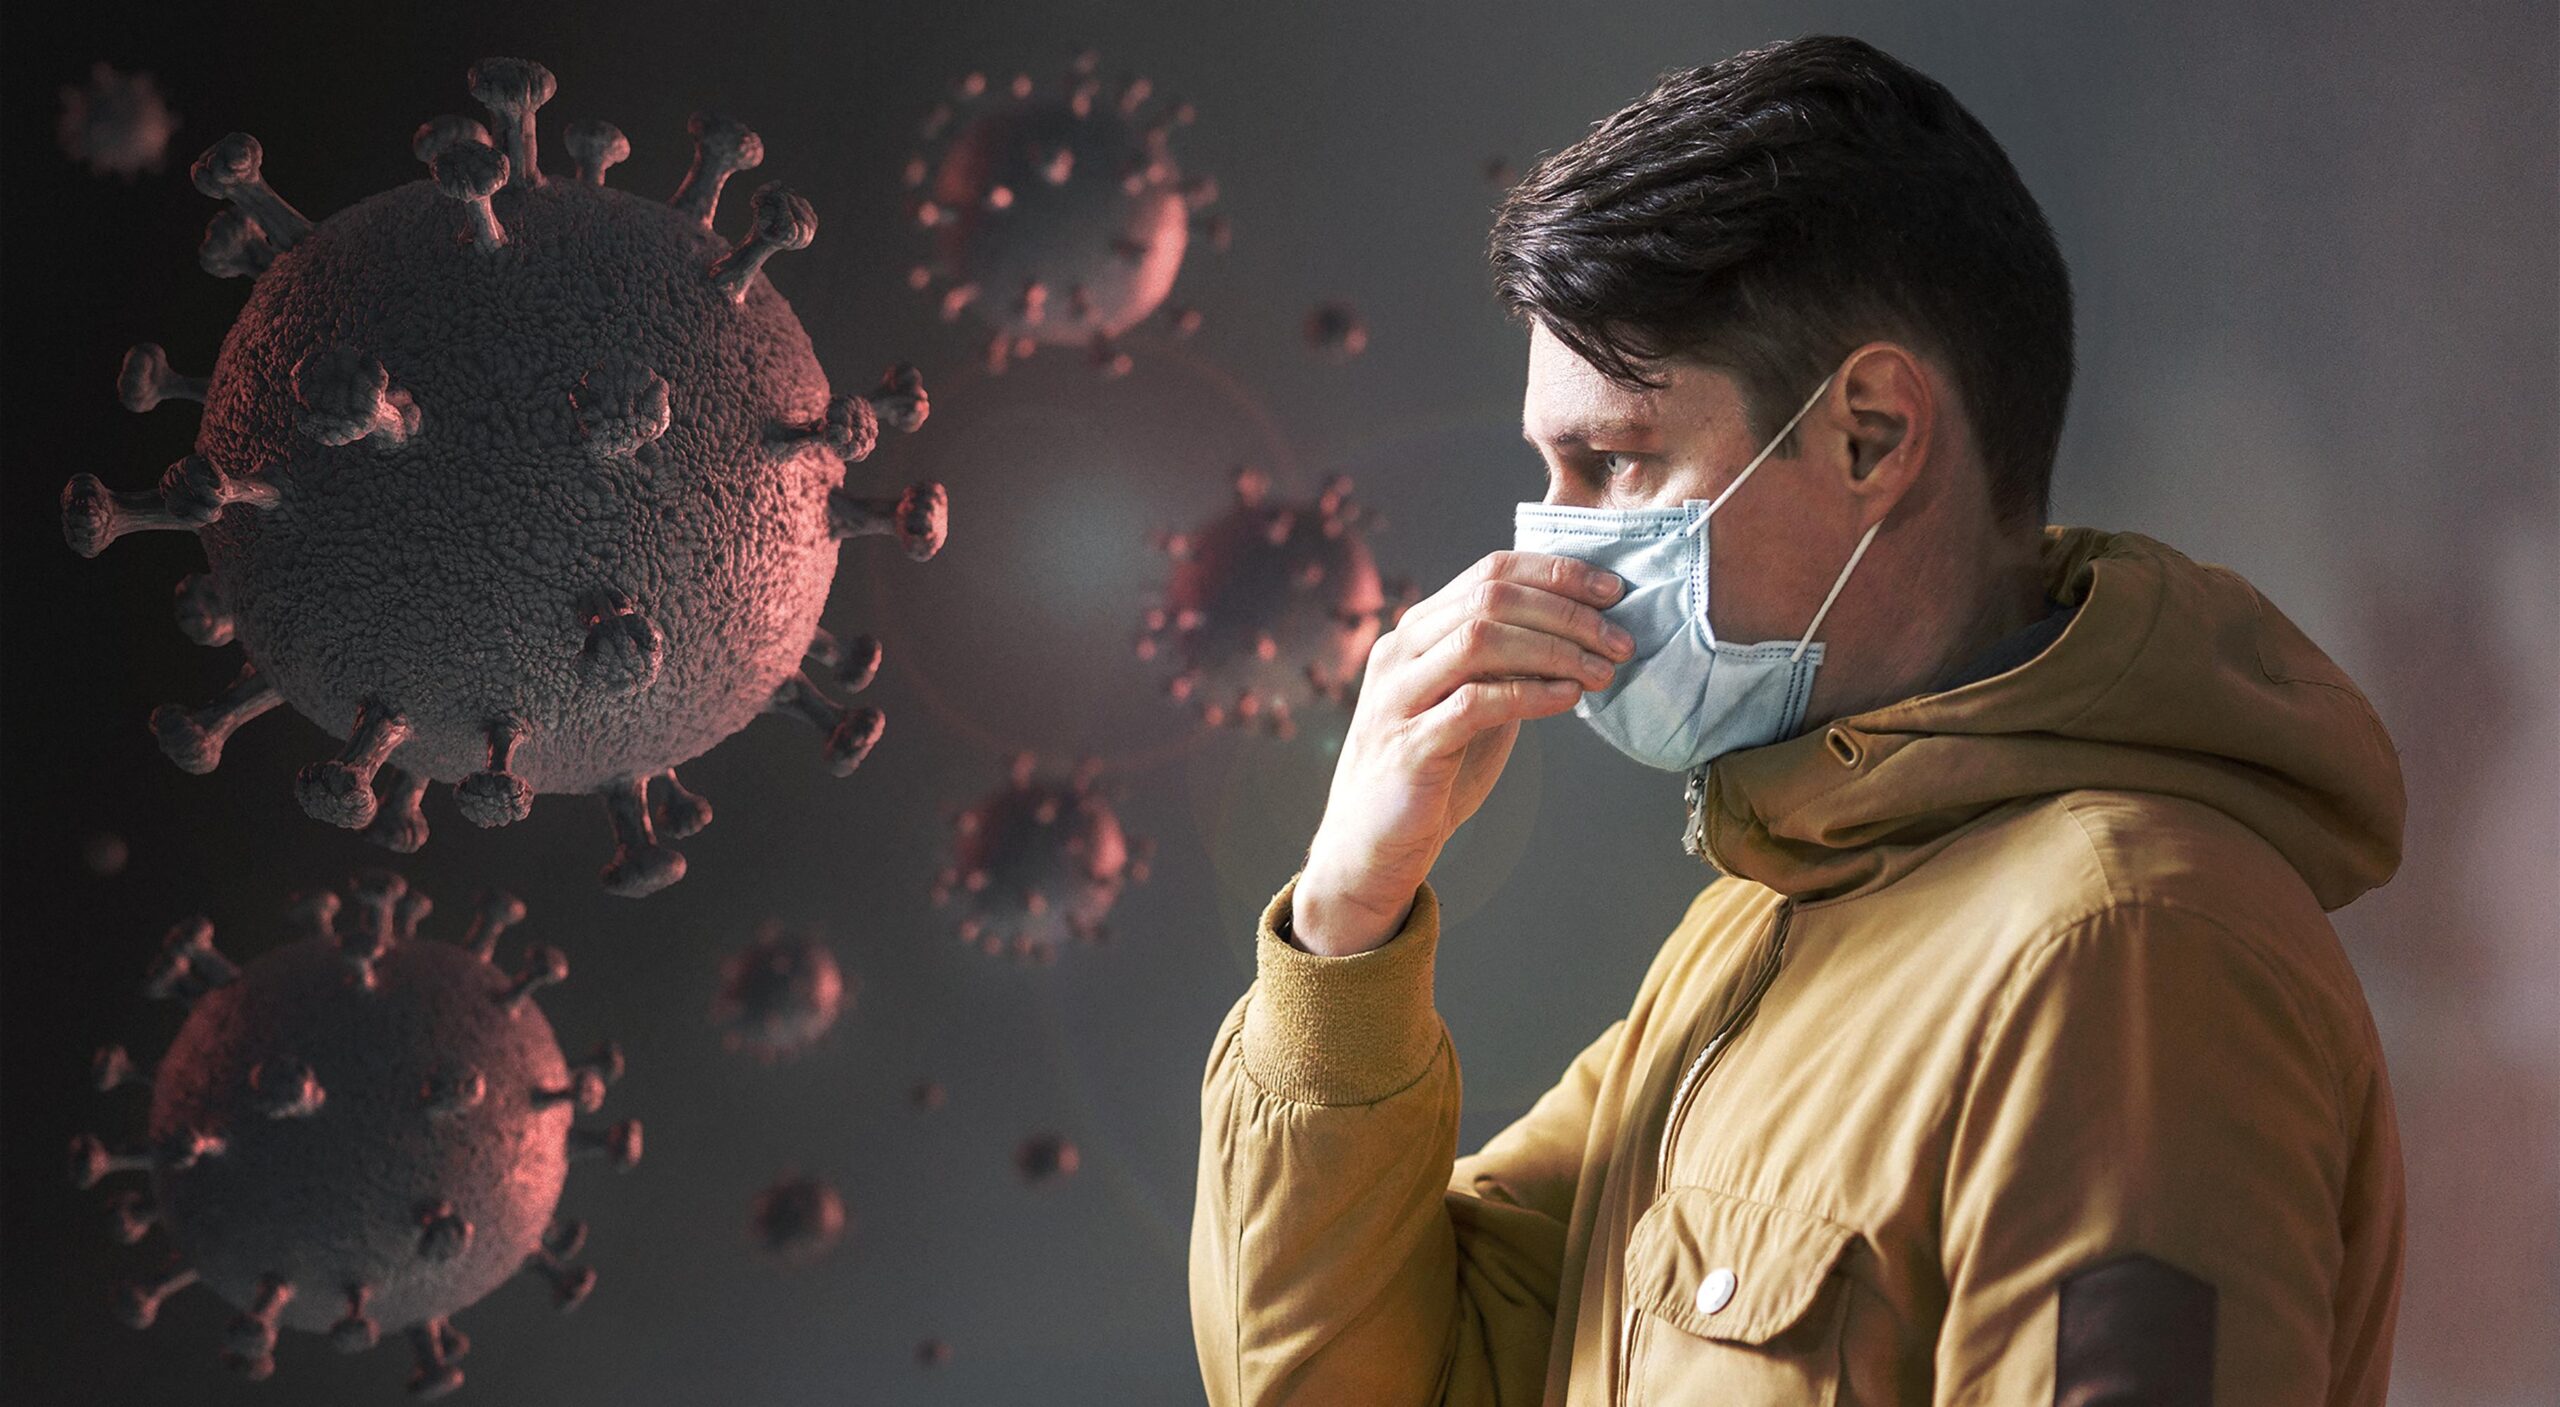 Why Does Insurance Become Vital in the Time of a Pandemic?